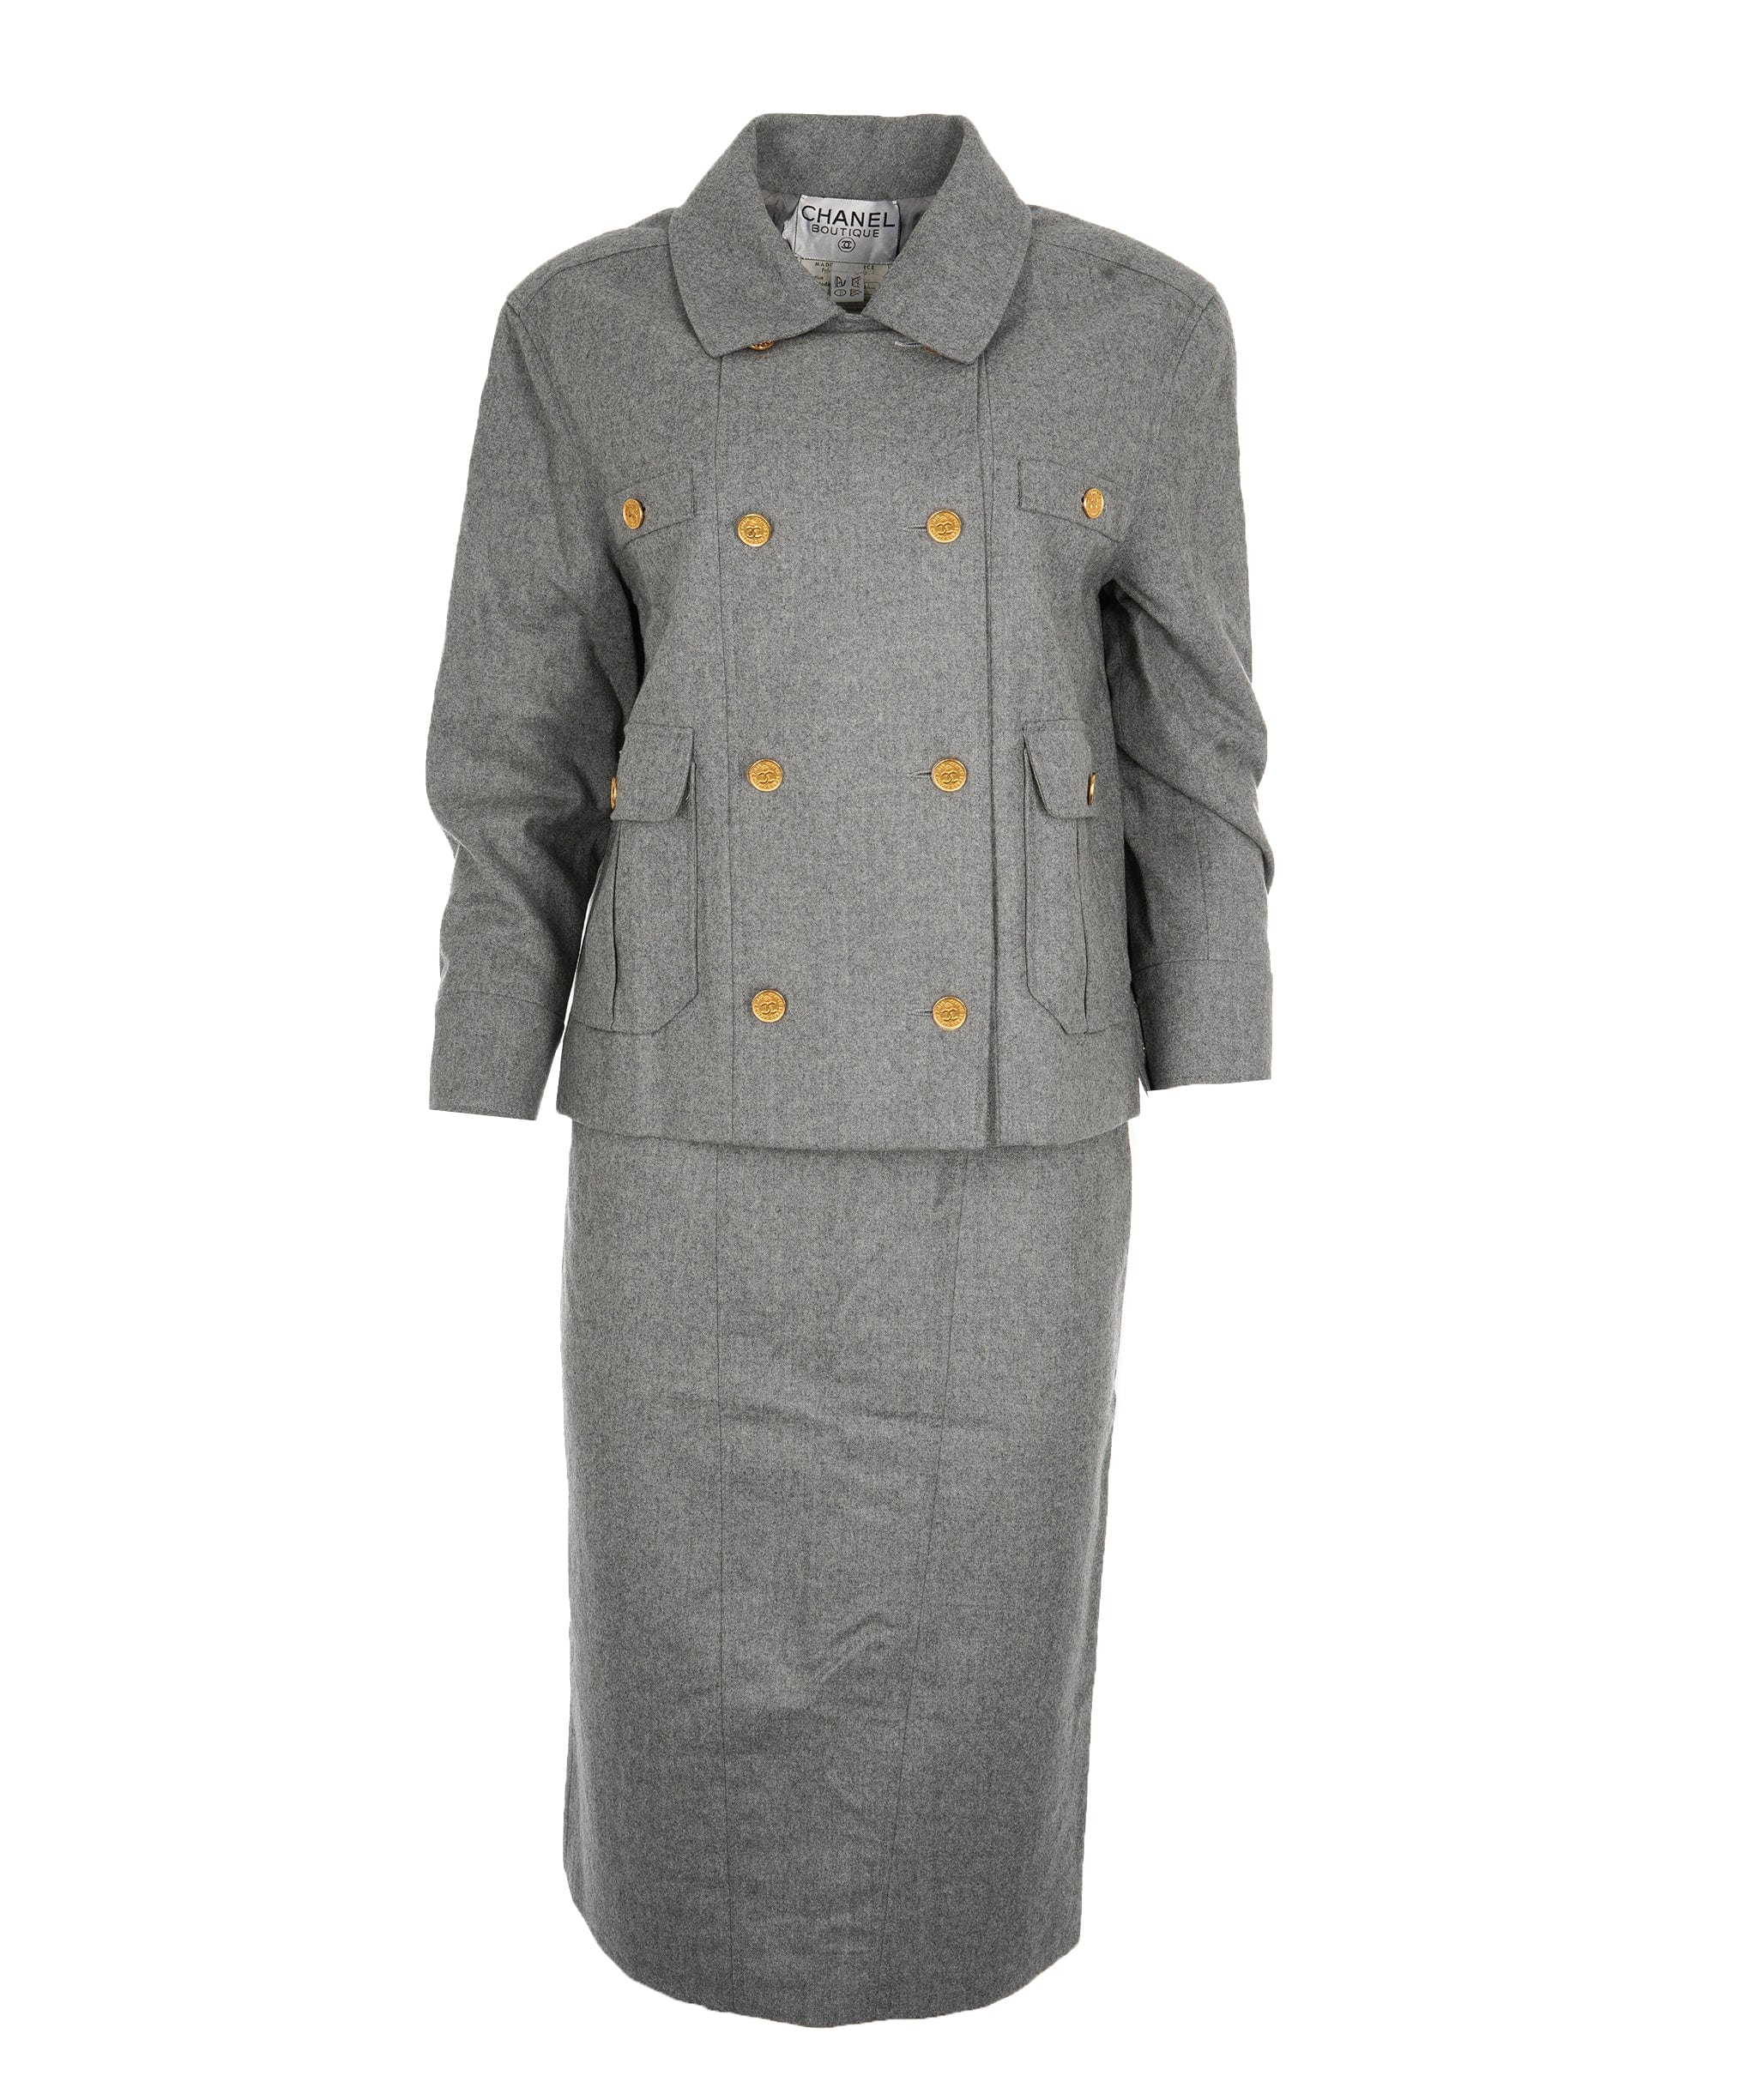 Chanel CHANEL Vintage 100% Wool Double Breasted Jacket & Skirt Suit Gray Size 36/38 #13522 AJCSC1304